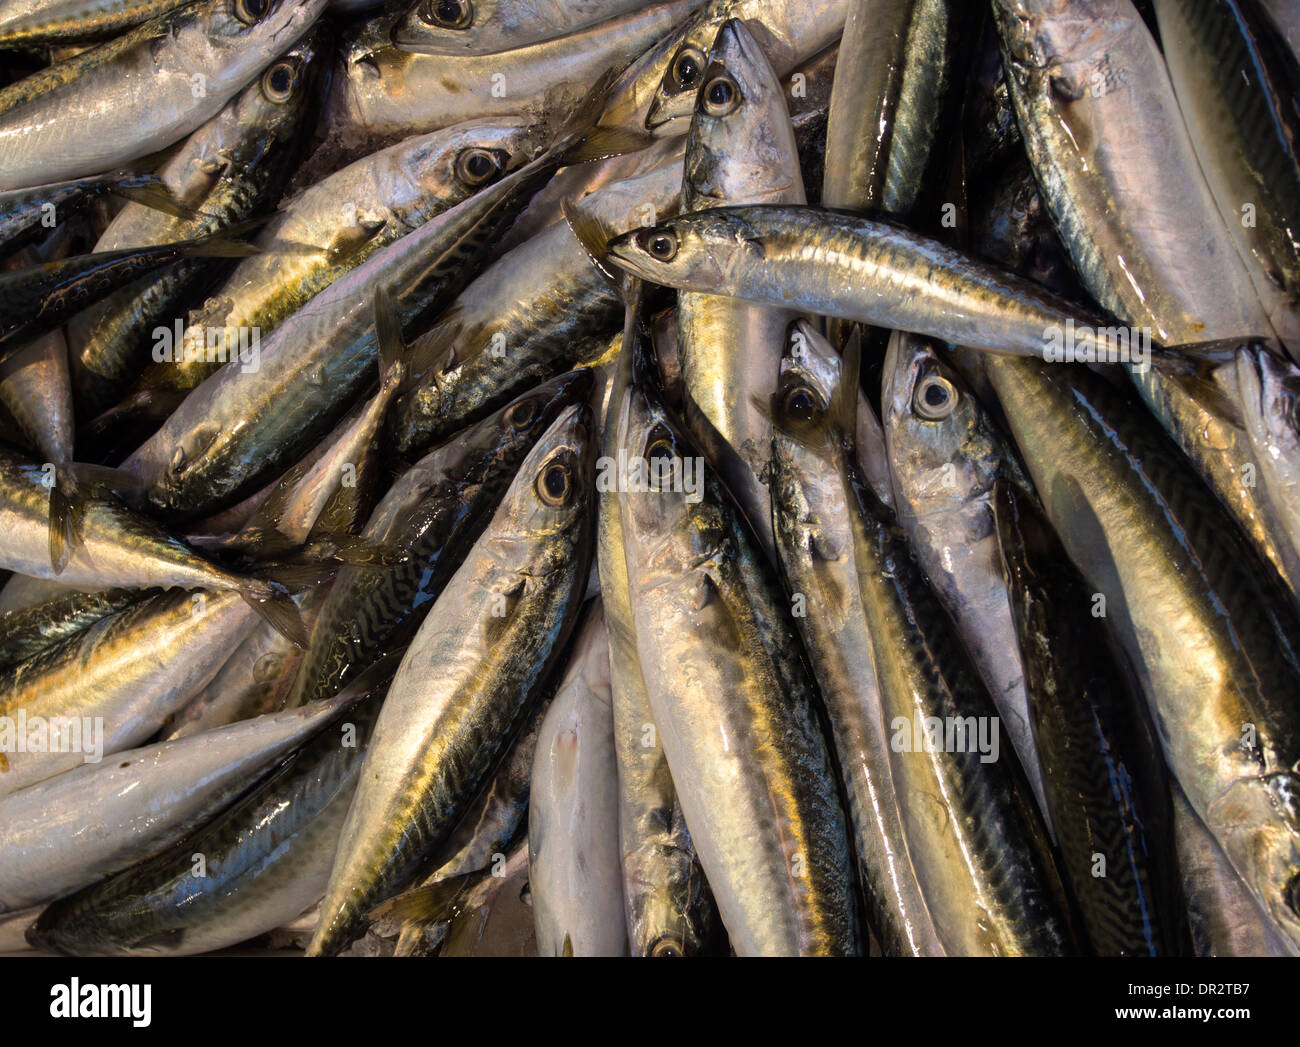 a close-up of little silver fishes - Spanish Mackerel - on an Italian fishmongers stall Stock Photo